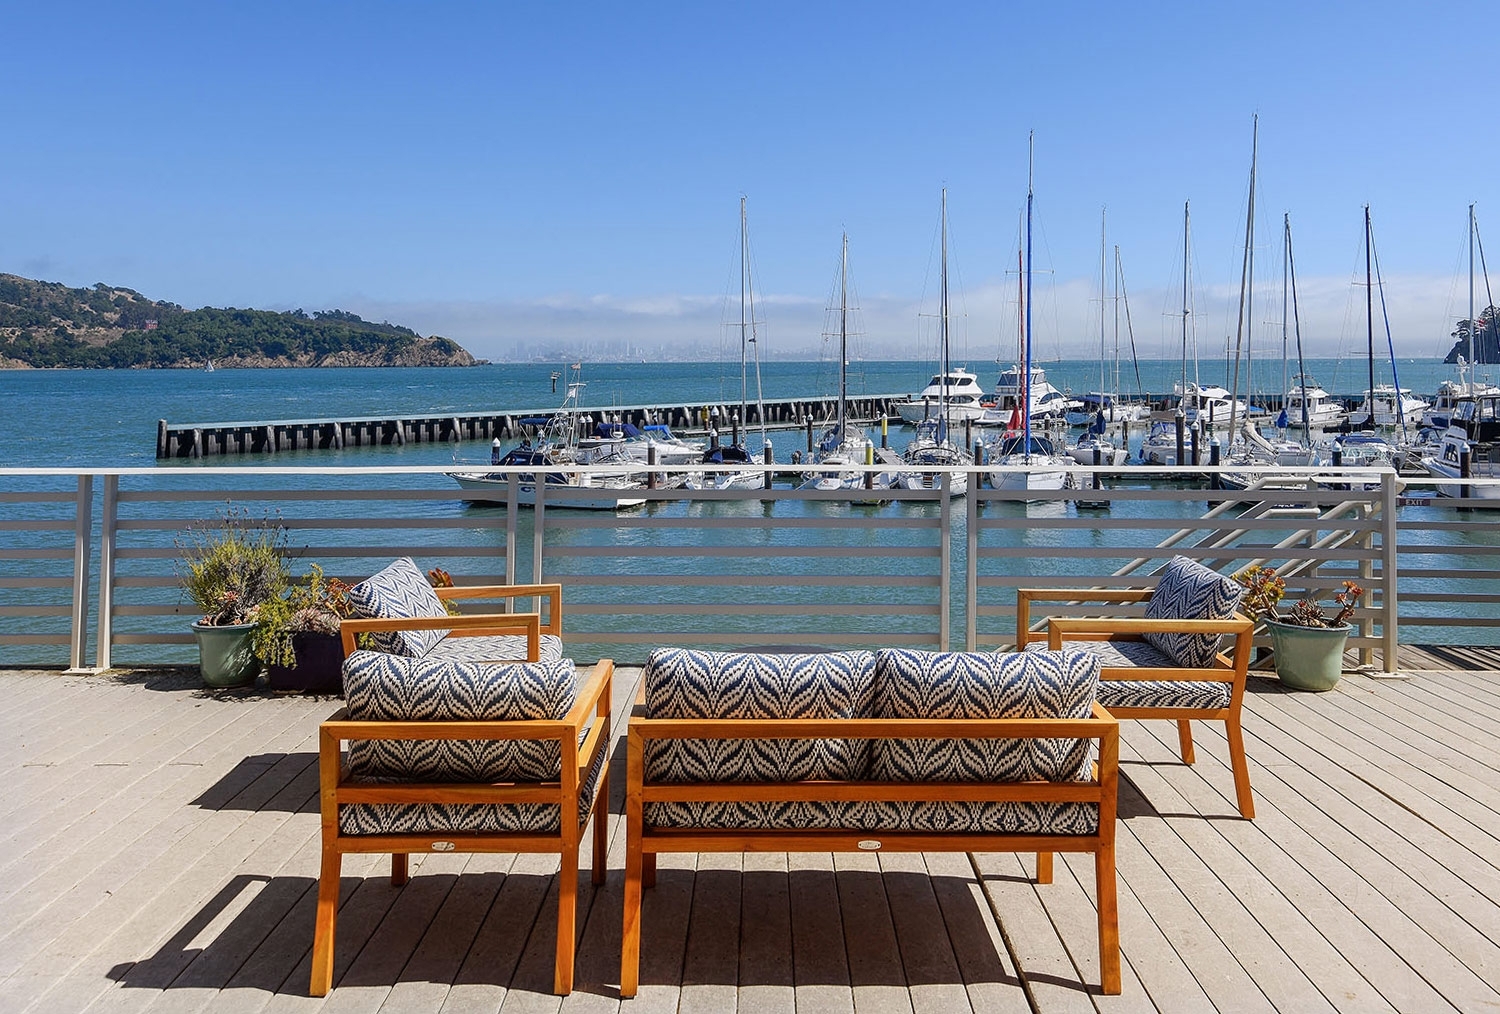 Sunny day on the Grand Deck with comfortable patio furniture looking out to the marina's boats3-6035.jpg